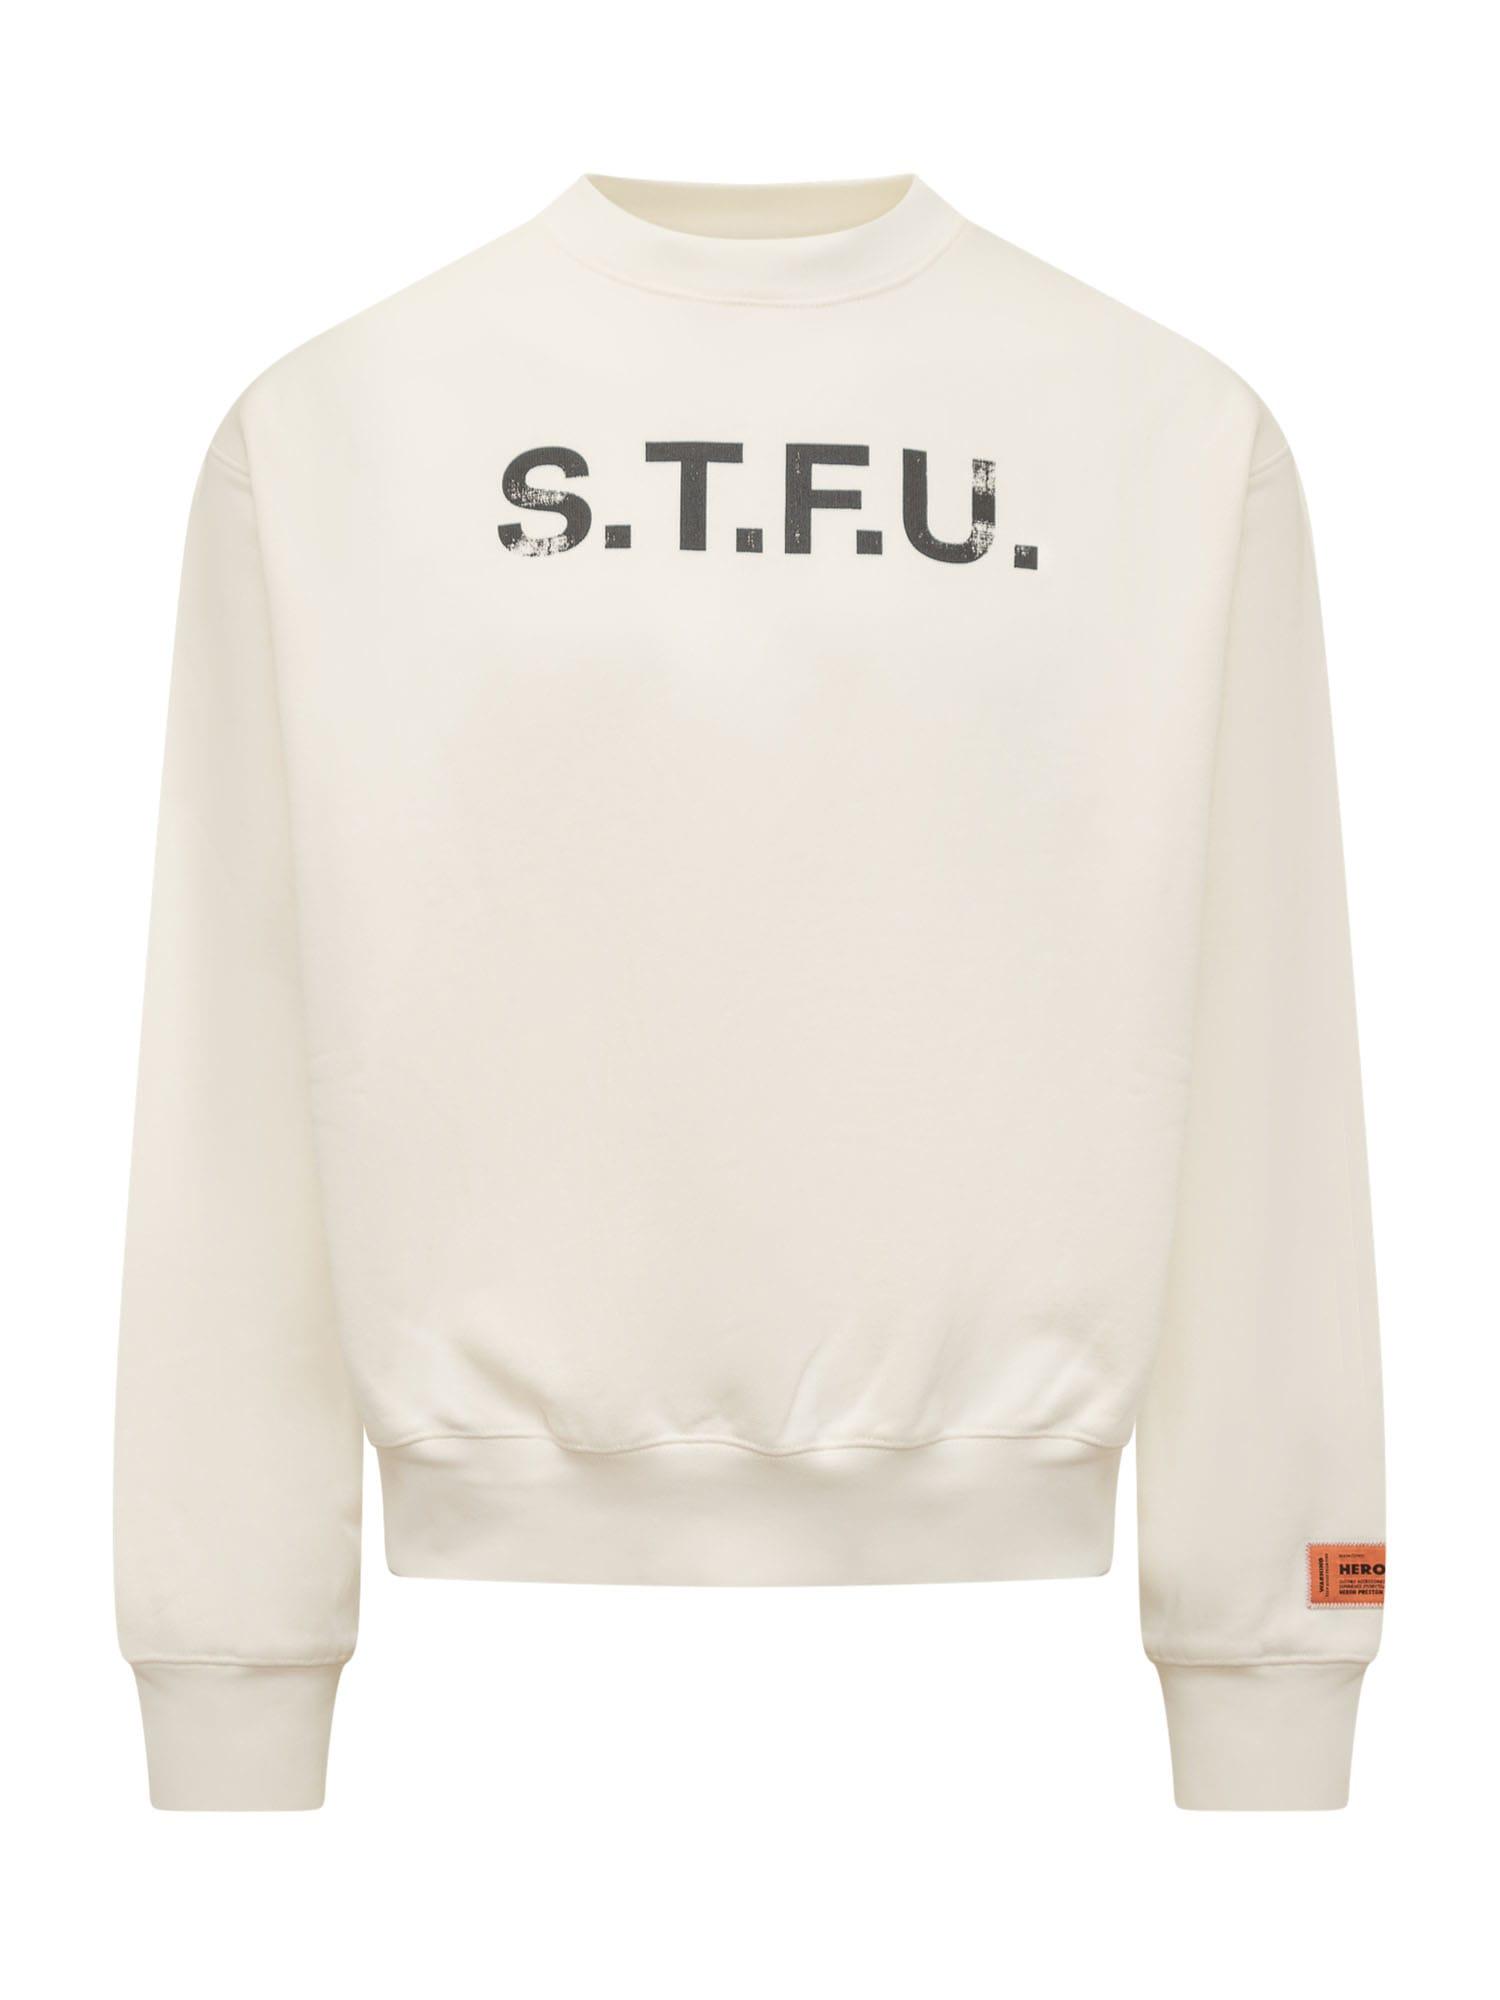 Heron Preston Multicensored Sweatshirt In Jersey With Contrast Print On  Front And Back And Logo Patch On The Sleeve in White for Men